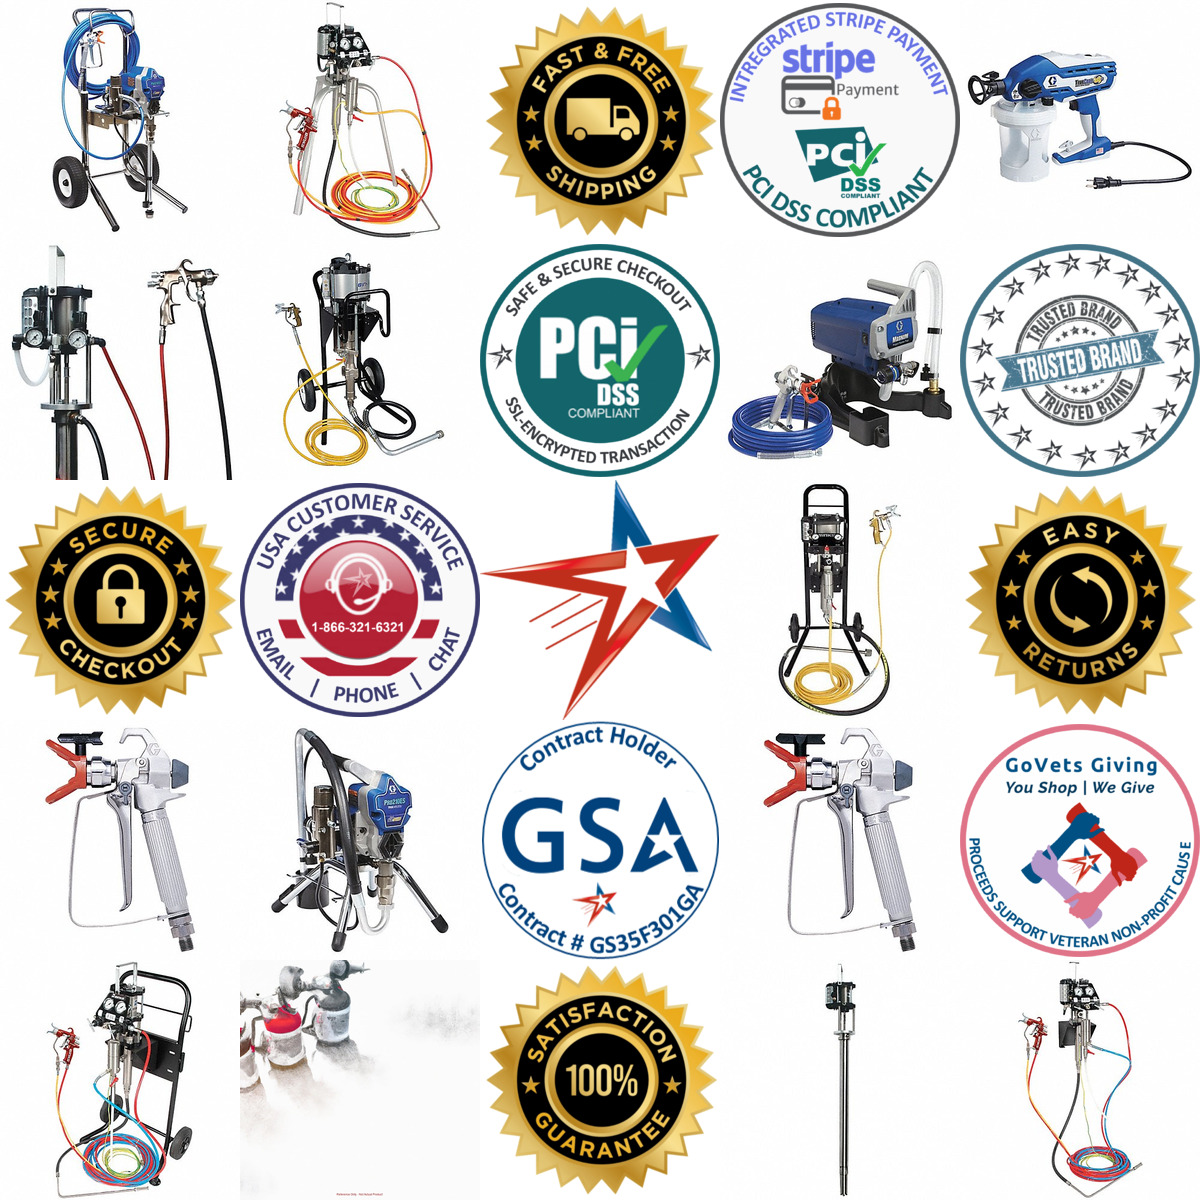 A selection of Air Powered Airless Paint Sprayers products on GoVets